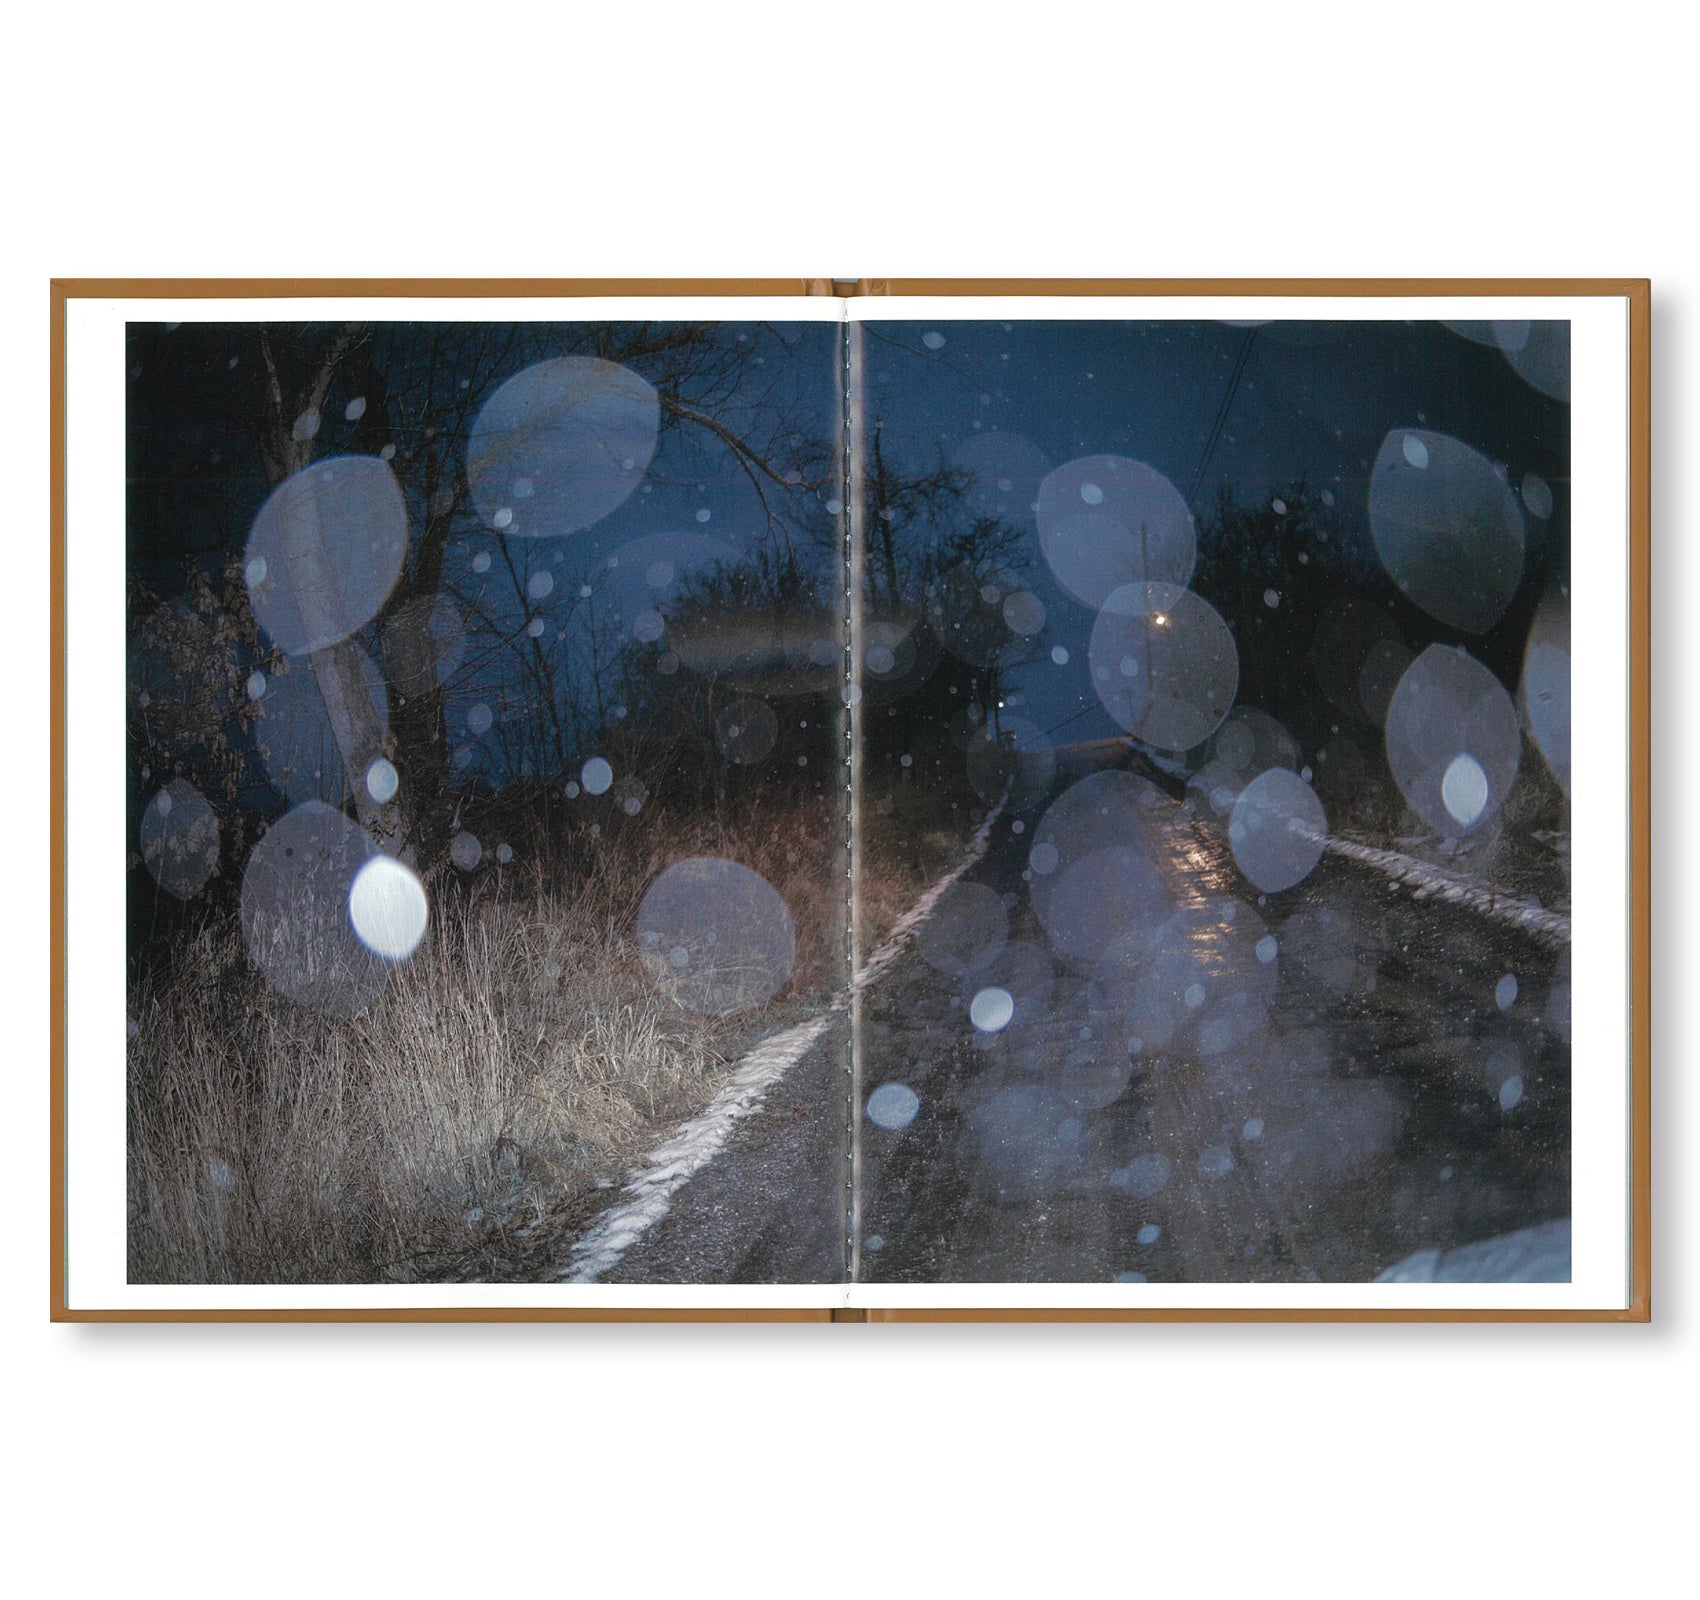 ONE PICTURE BOOK #93: SEASONS ROAD by Todd Hido